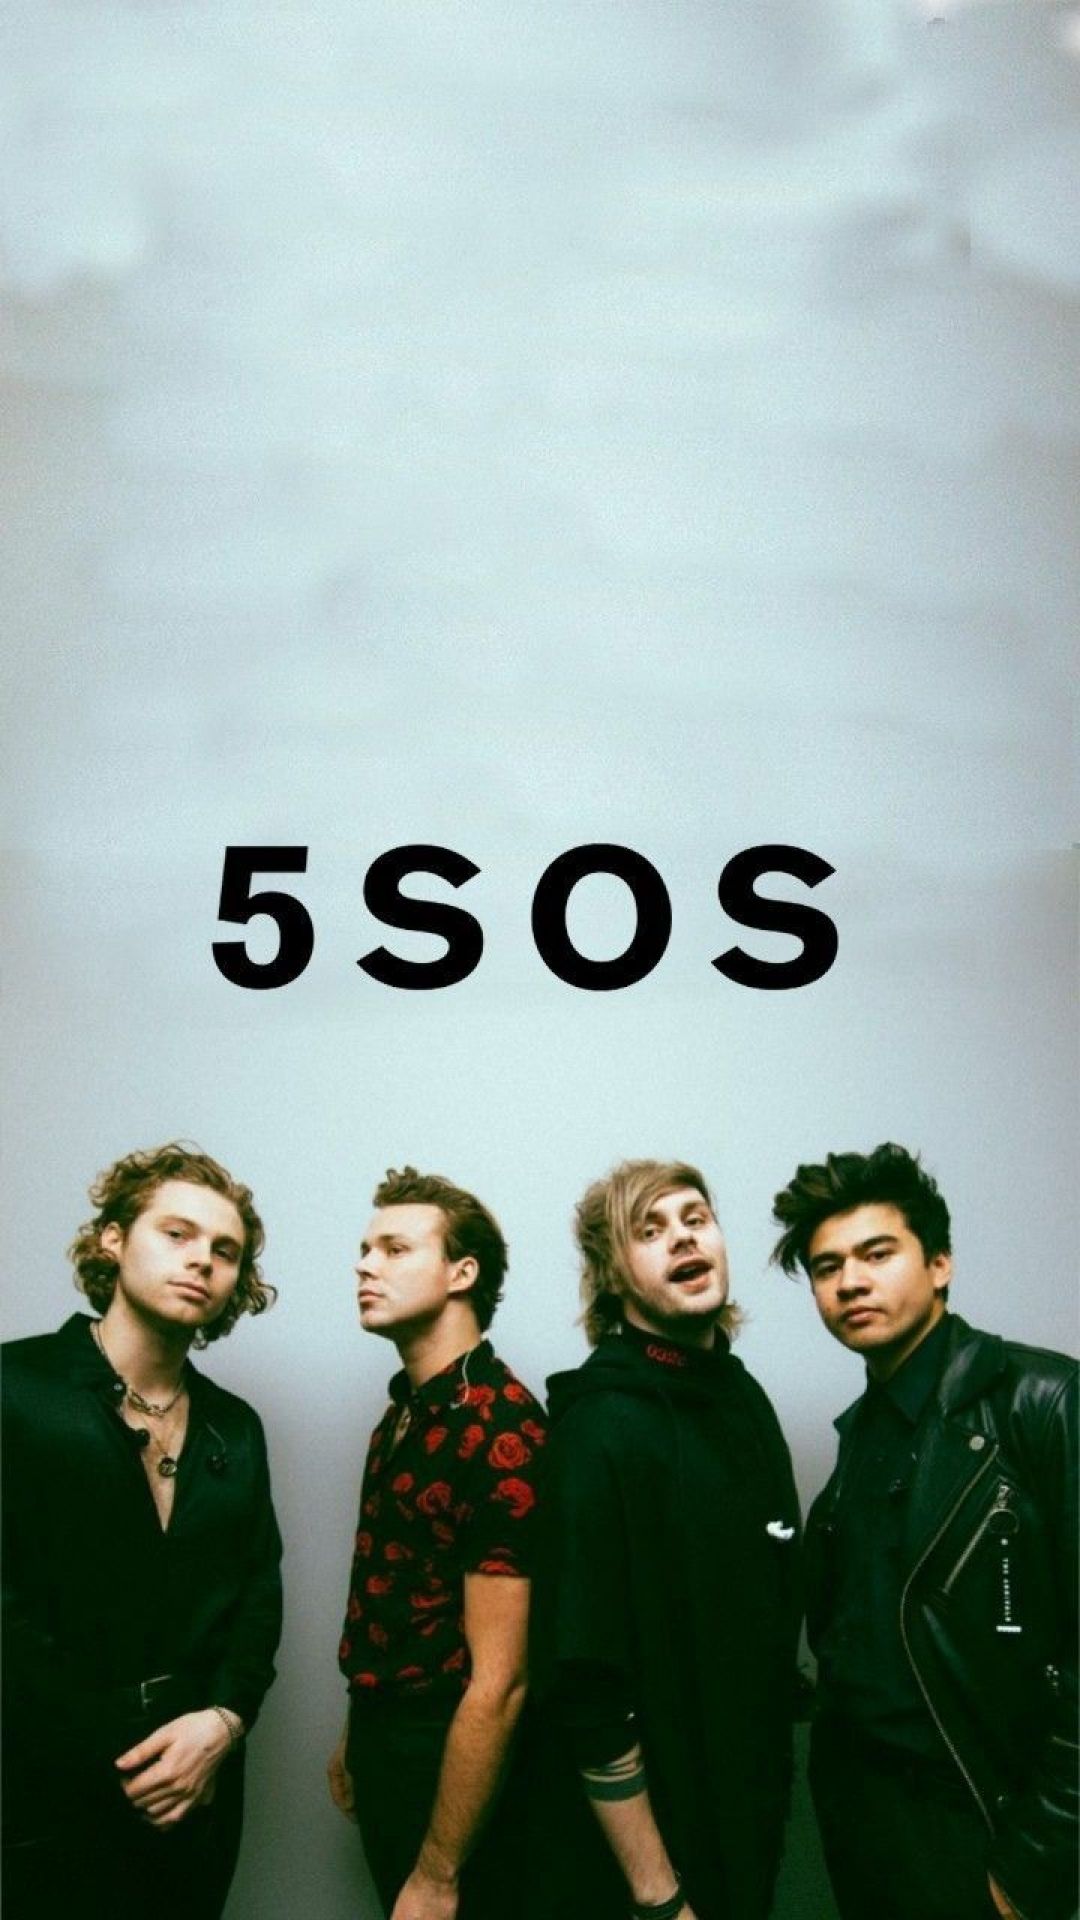 Seconds Of Summer Background